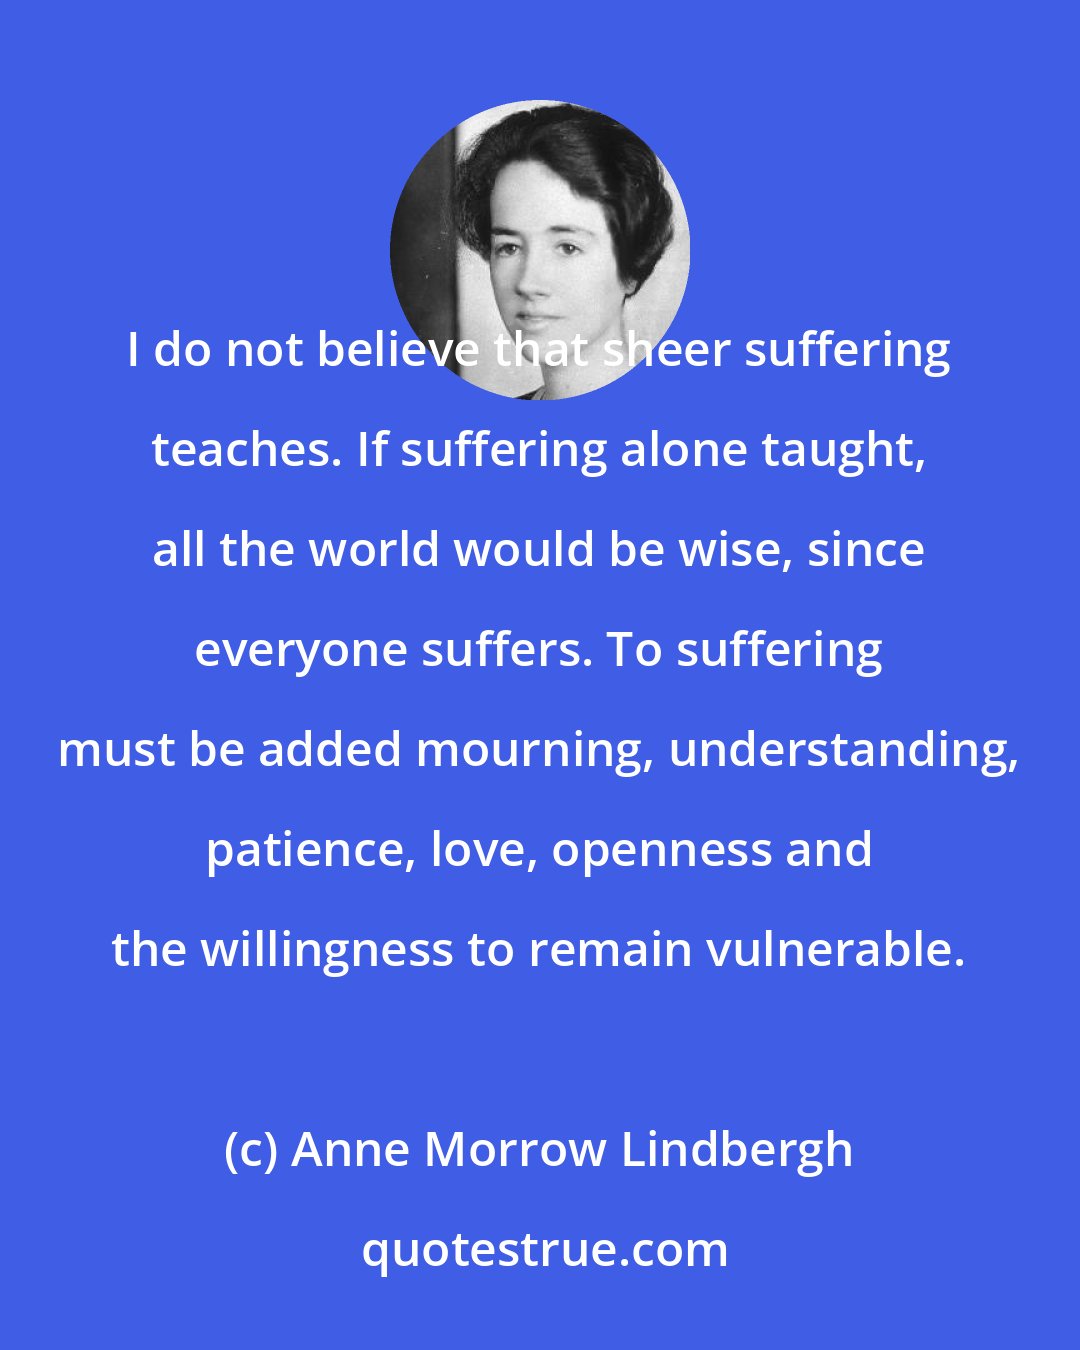 Anne Morrow Lindbergh: I do not believe that sheer suffering teaches. If suffering alone taught, all the world would be wise, since everyone suffers. To suffering must be added mourning, understanding, patience, love, openness and the willingness to remain vulnerable.